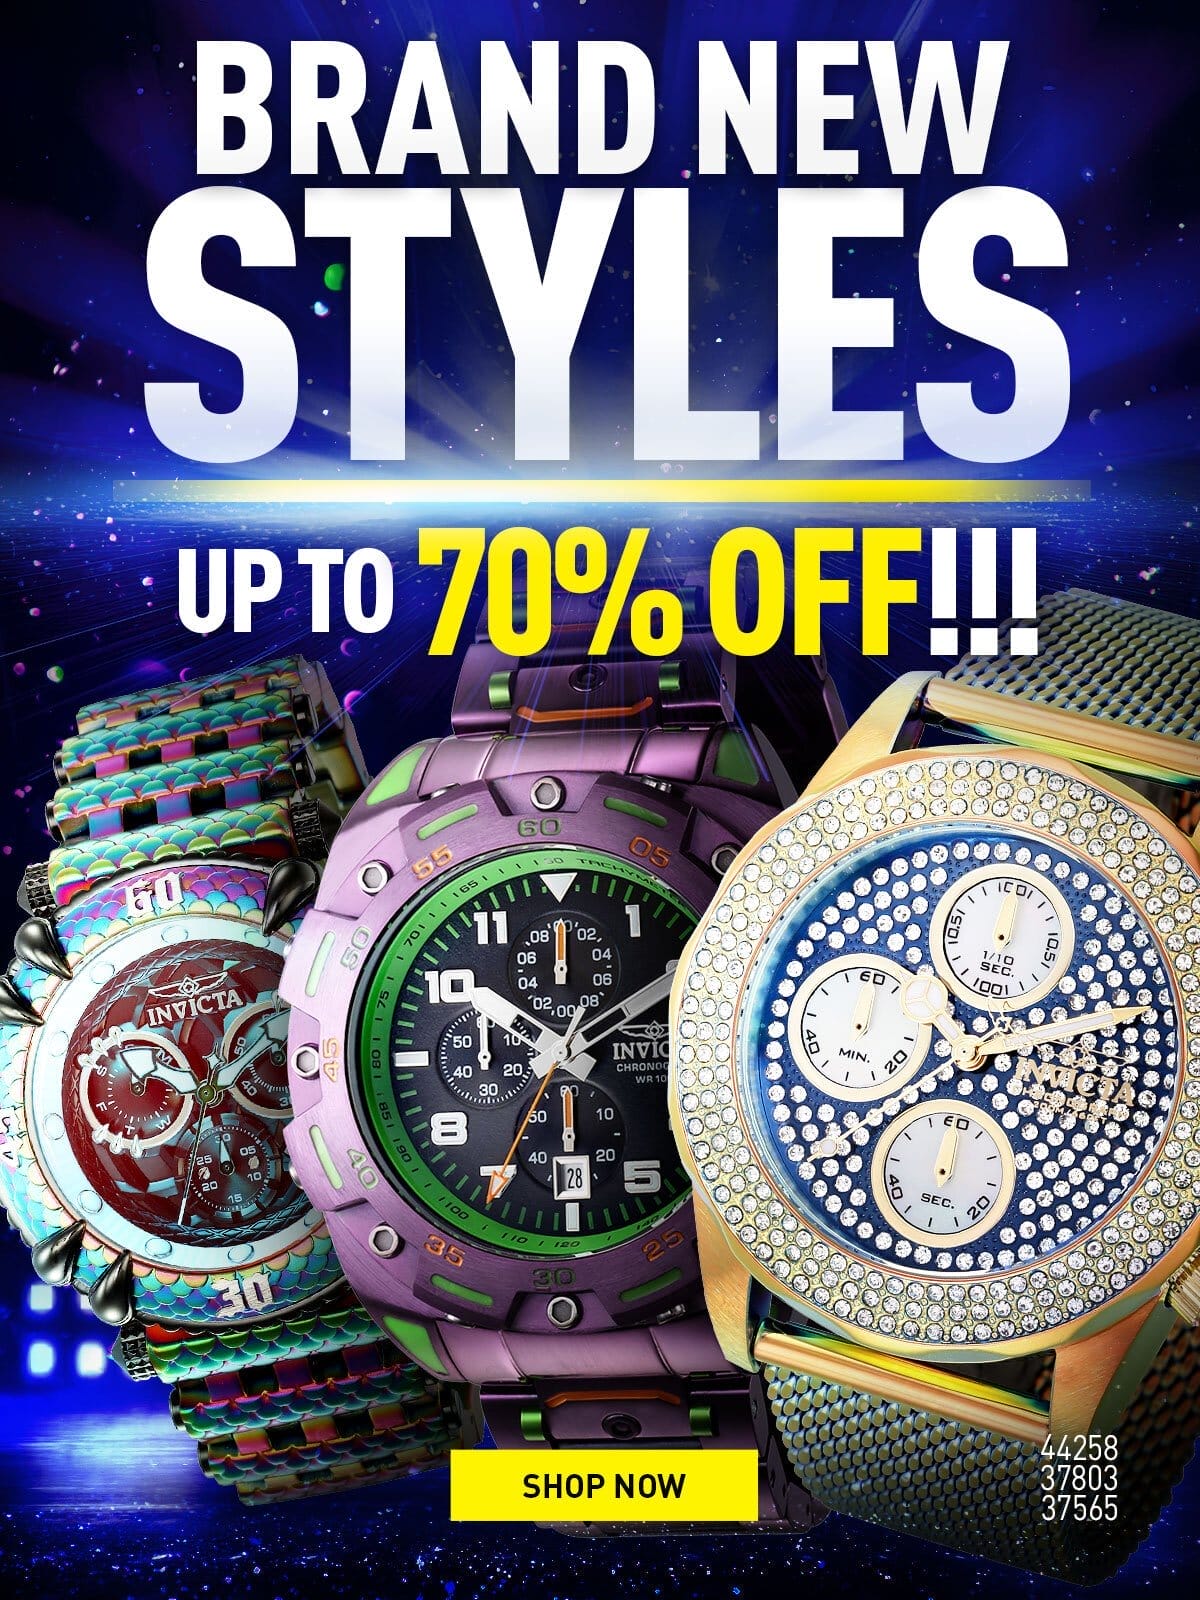 Brand new styles - Up to 70% off